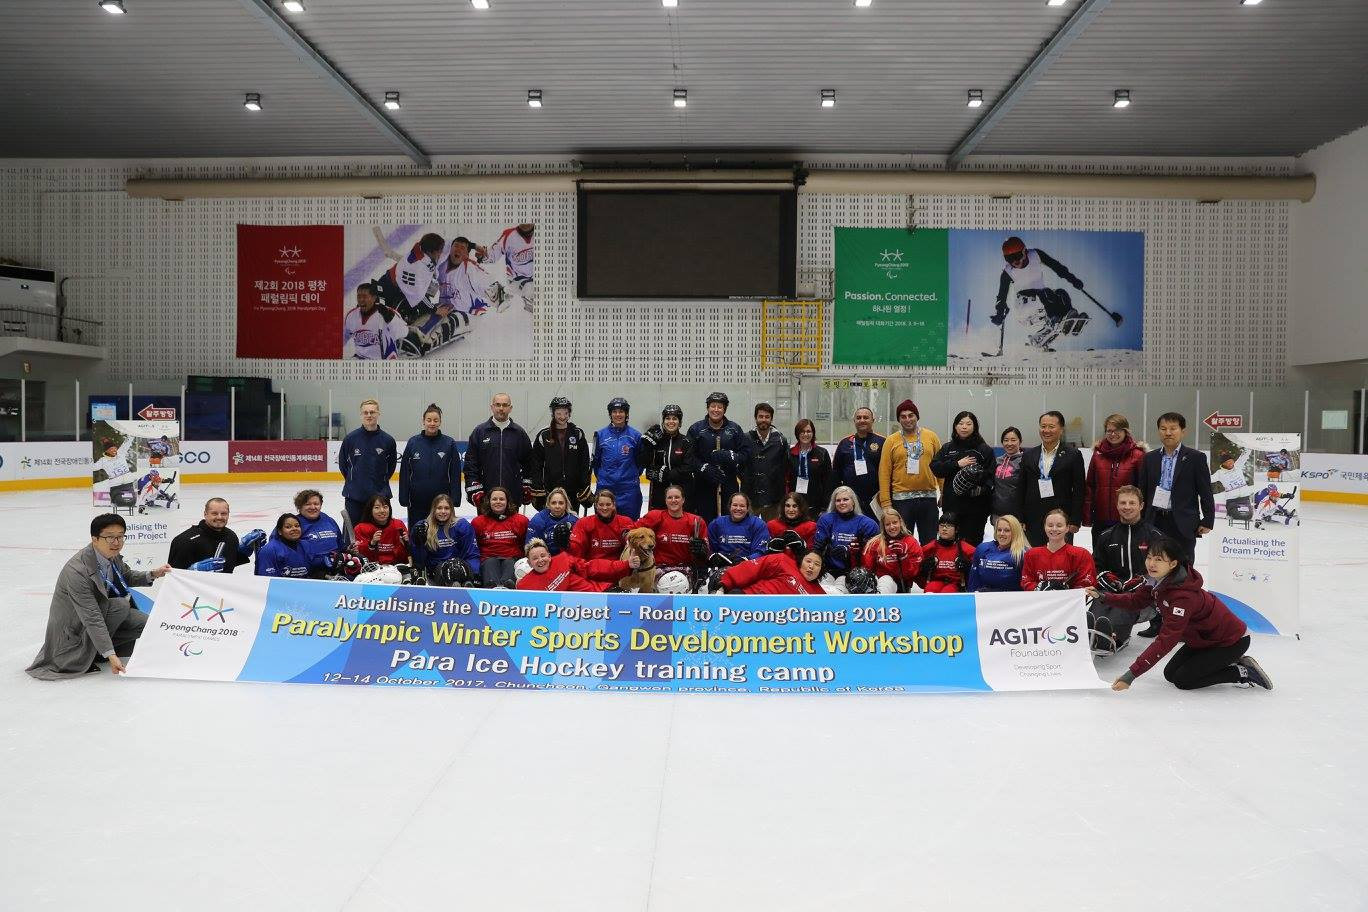 A total of 30 athletes and coaches took part in the Para ice hockey workshop ©World Para Ice Hockey